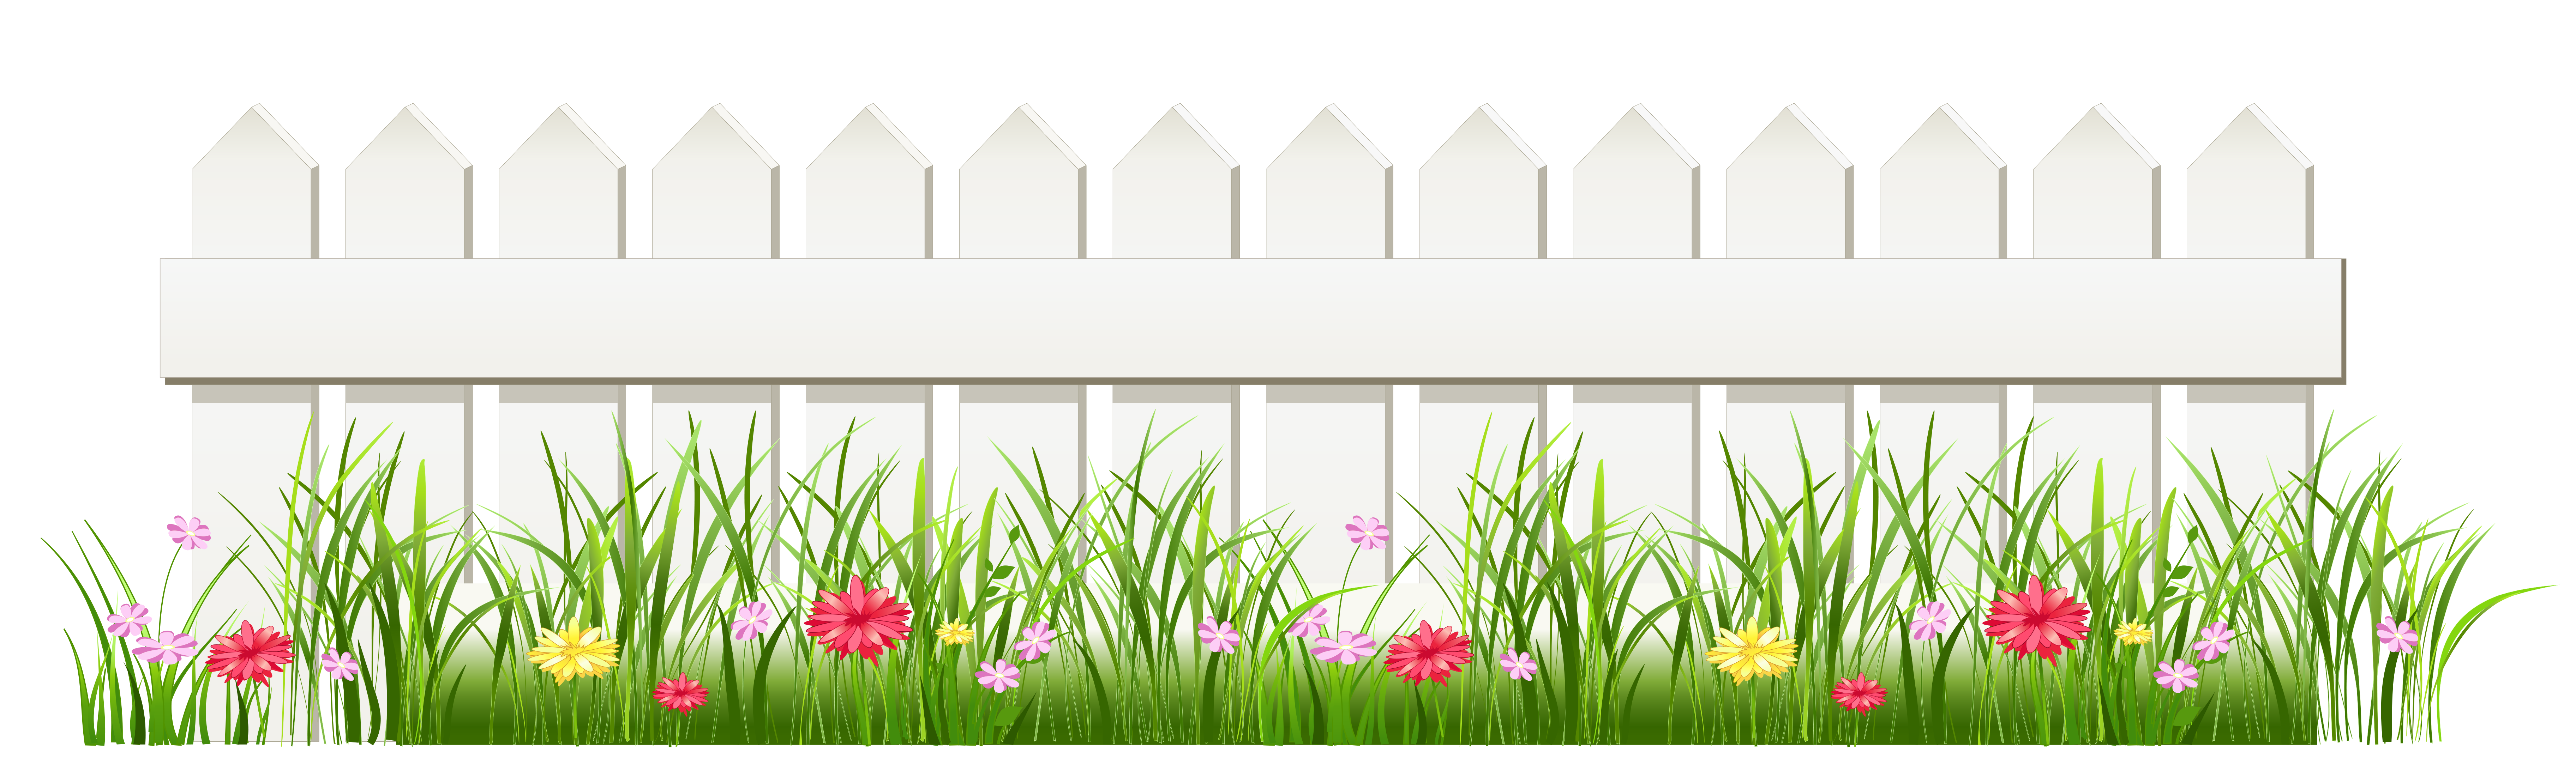 Winter clipart divider. Transparent white fence with